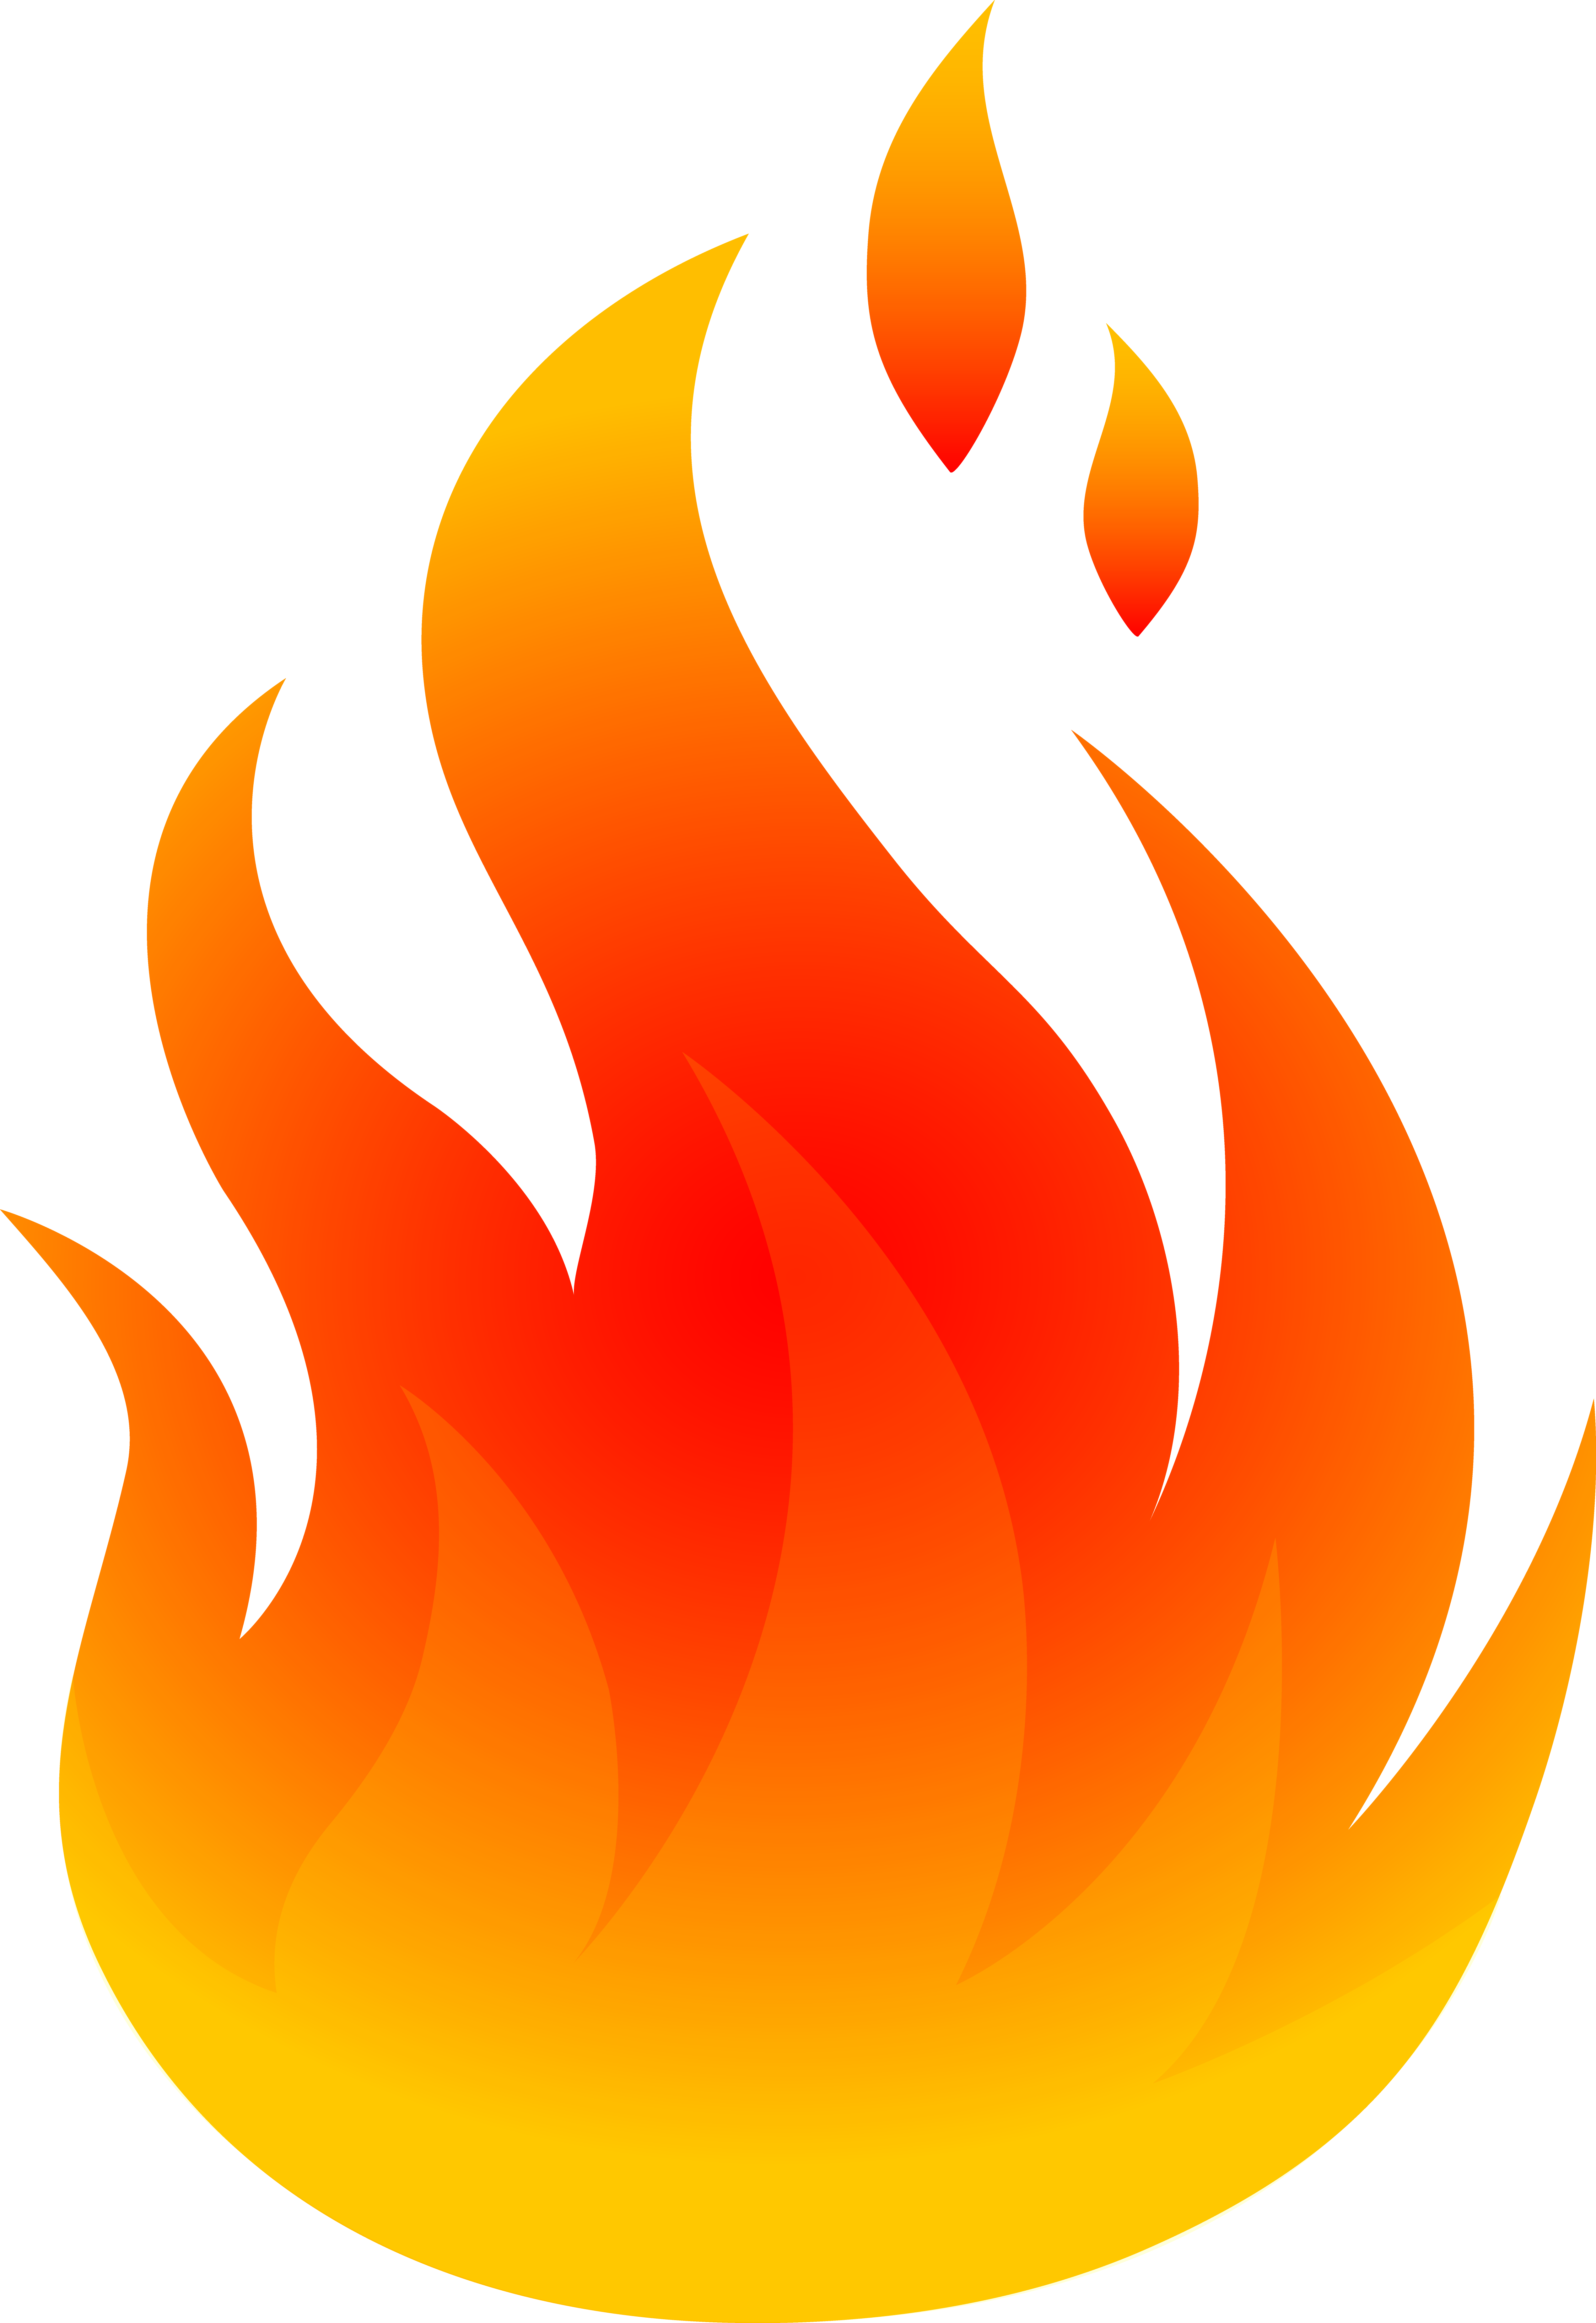 Mouth on fire clipart